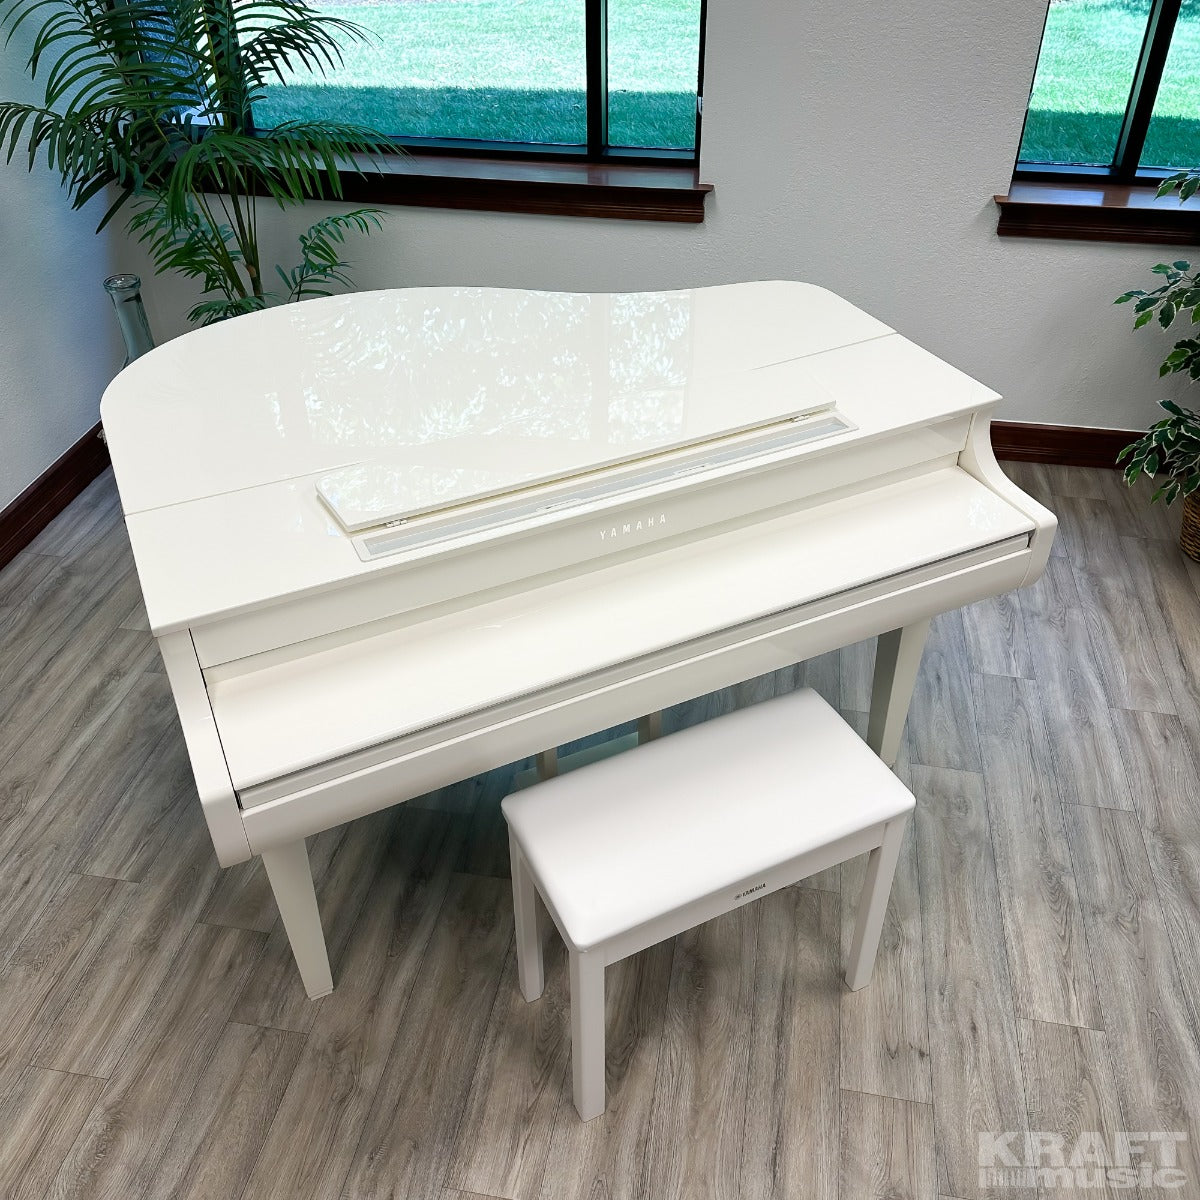 Yamaha Clavinova CLP-765GP Digital Piano - Polished White - Lid and key cover closed and music rest down view 2